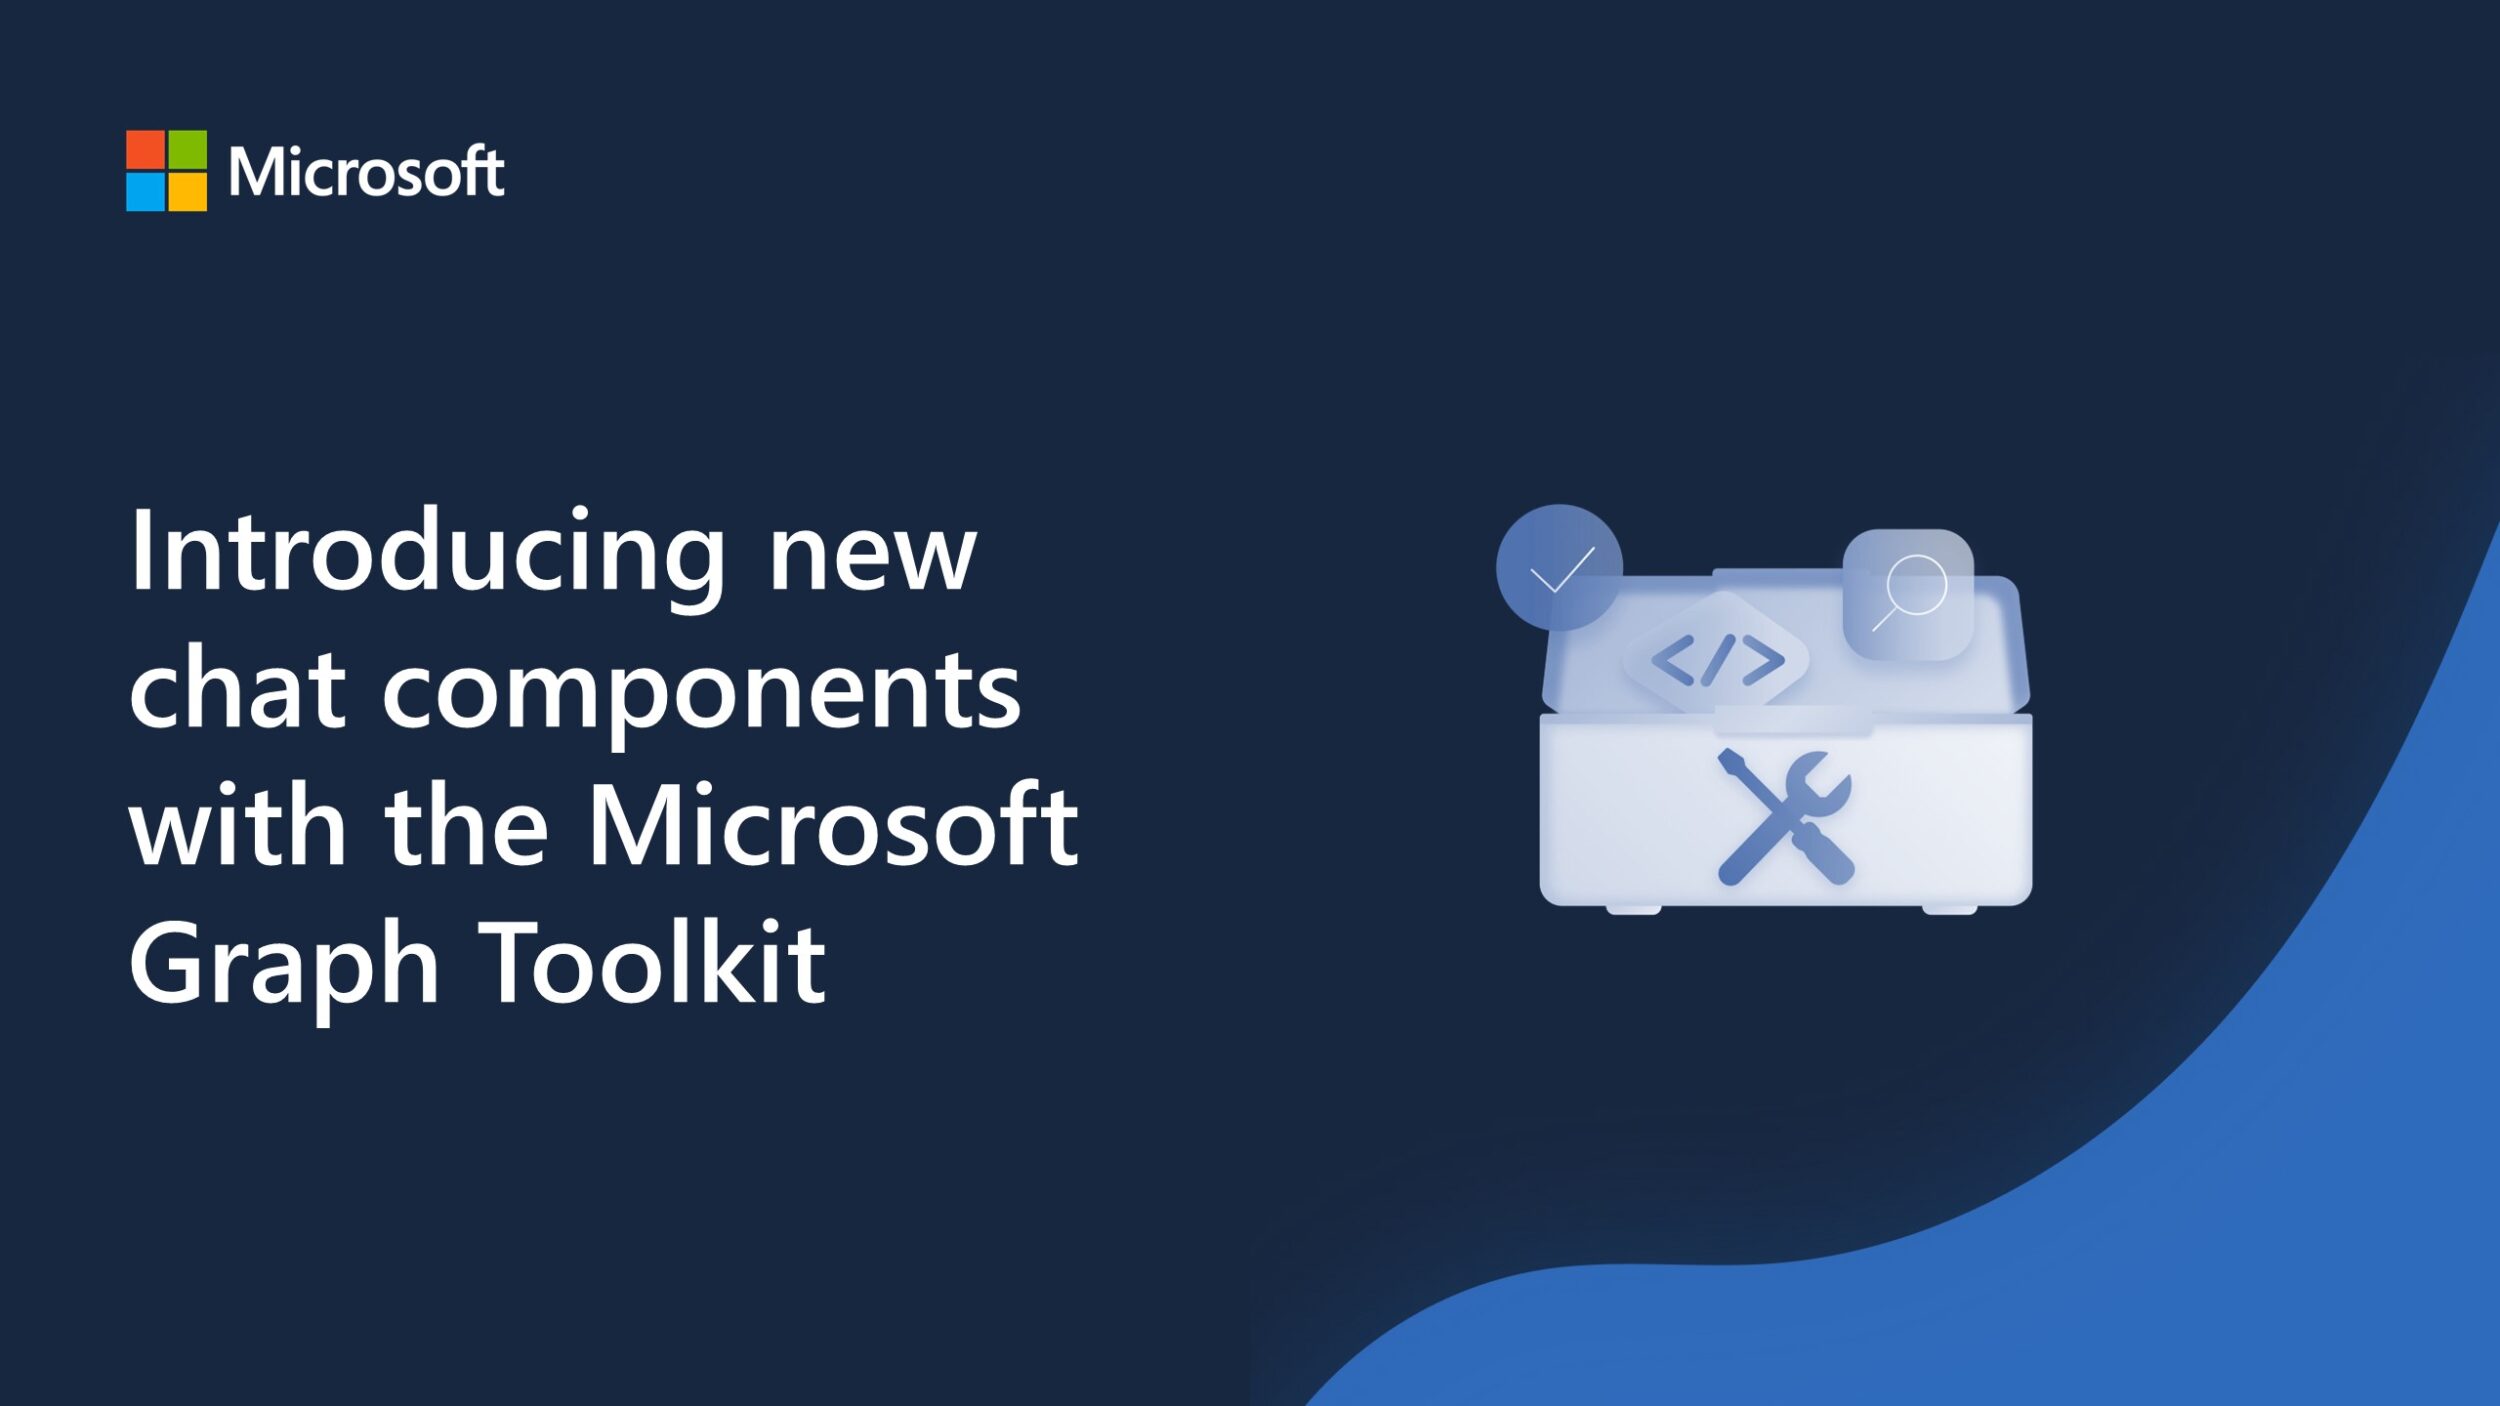 Introducing new chat components with the Microsoft Graph Toolkit